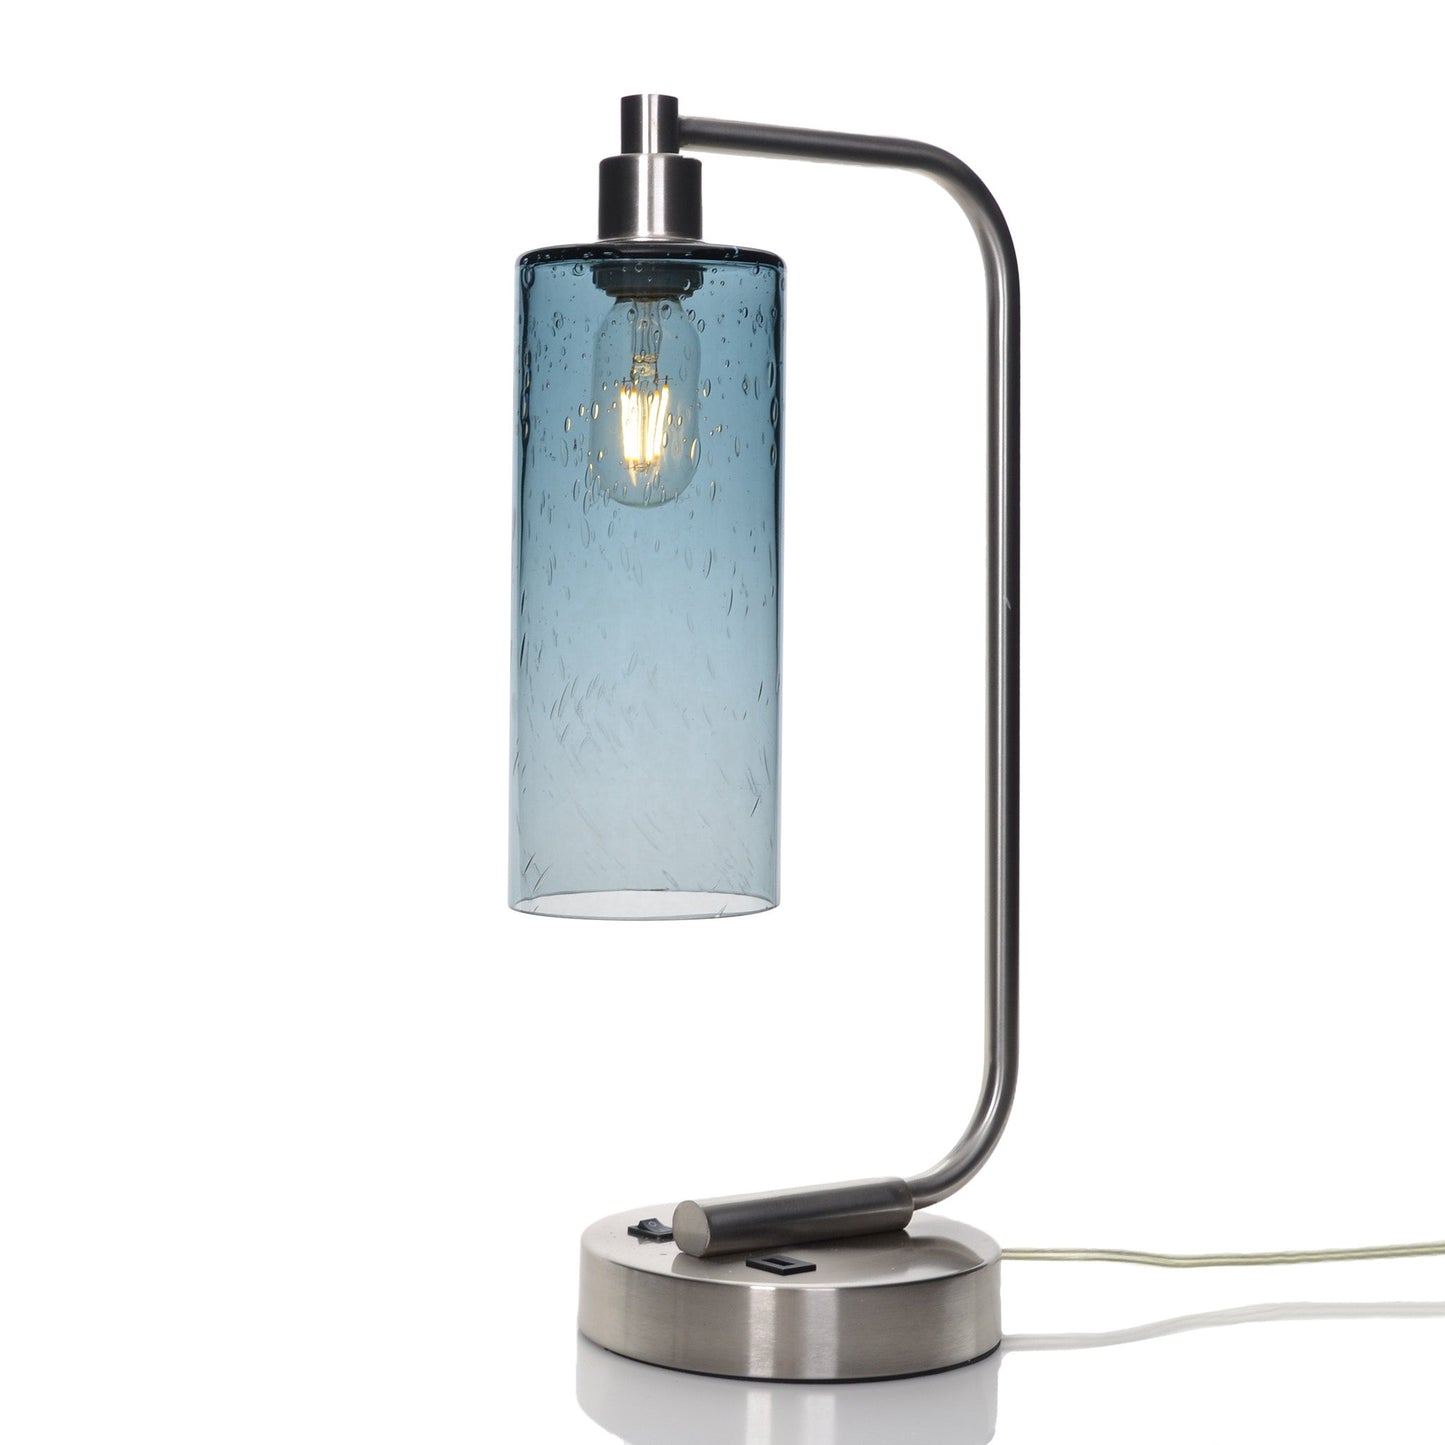 515 Lunar: Table Lamp-Glass-Bicycle Glass Co - Hotshop-Slate Gray-Brushed Nickel-4 Watt LED (+$0.00)-Bicycle Glass Co